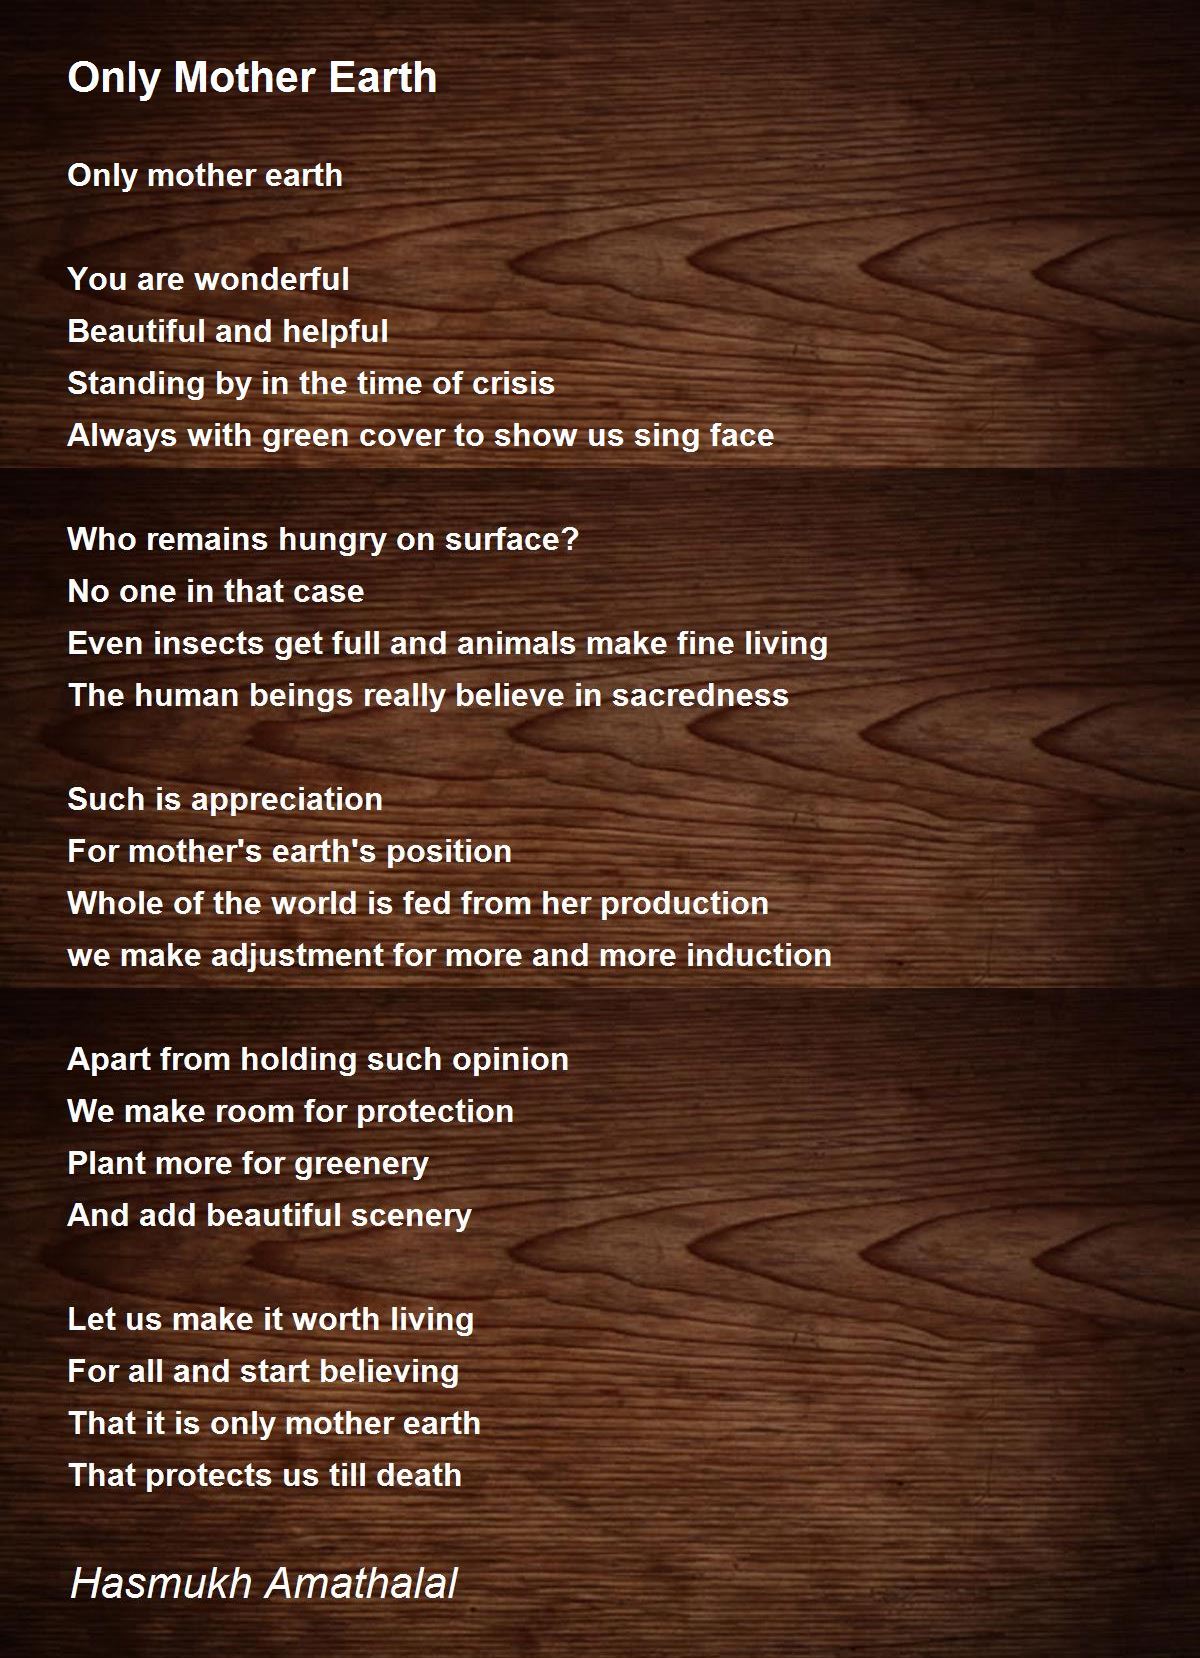 Only Mother Earth - Only Mother Earth Poem by Mehta Hasmukh Amathaal